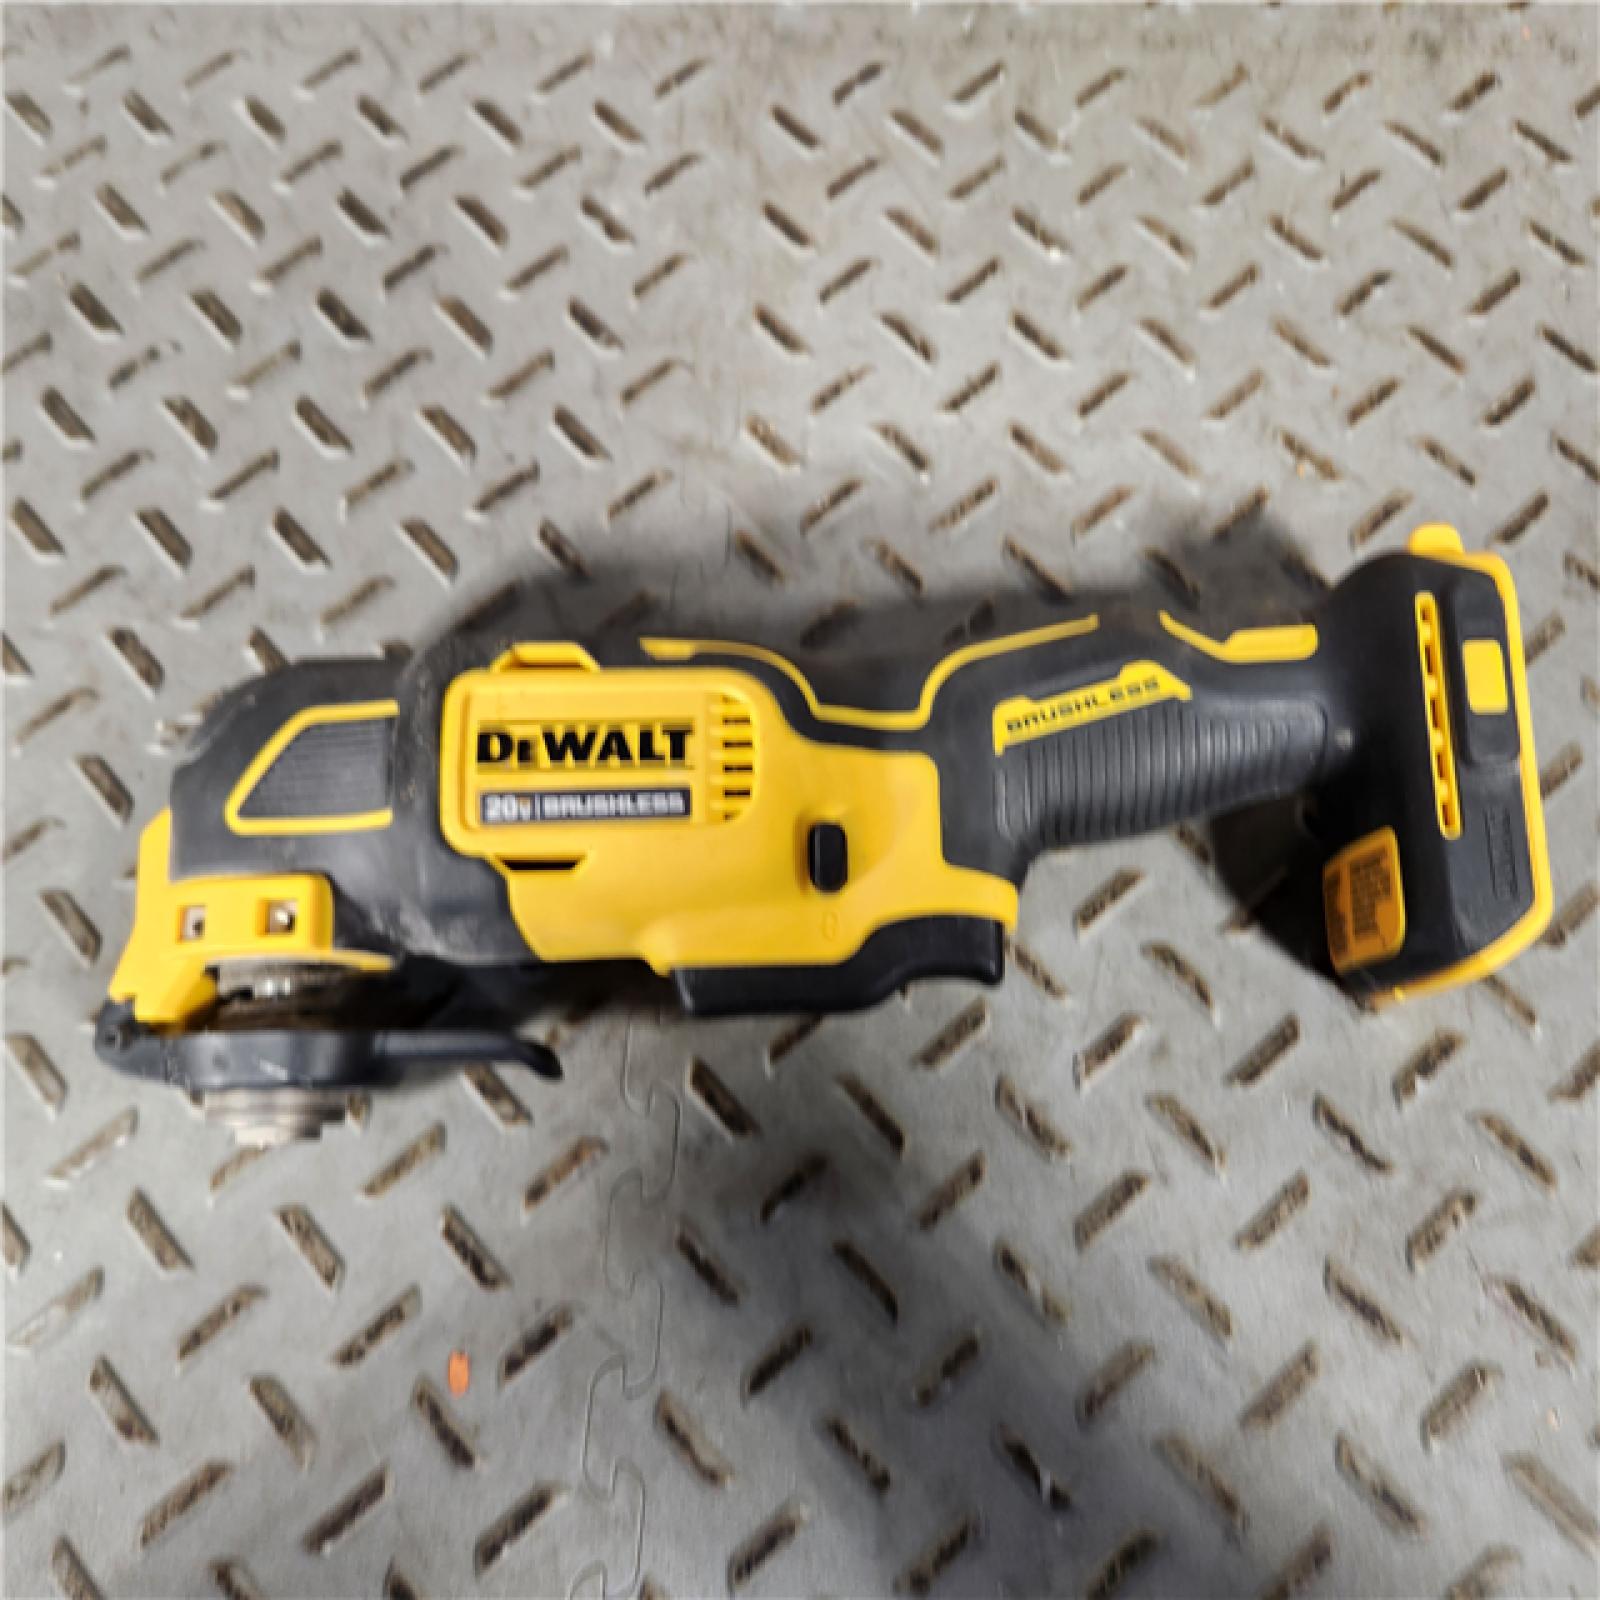 Houston location - AS-IS Atomic DeWalt Reciprocating Saw (TOOL ONLY) - Appears IN GOOD Condition